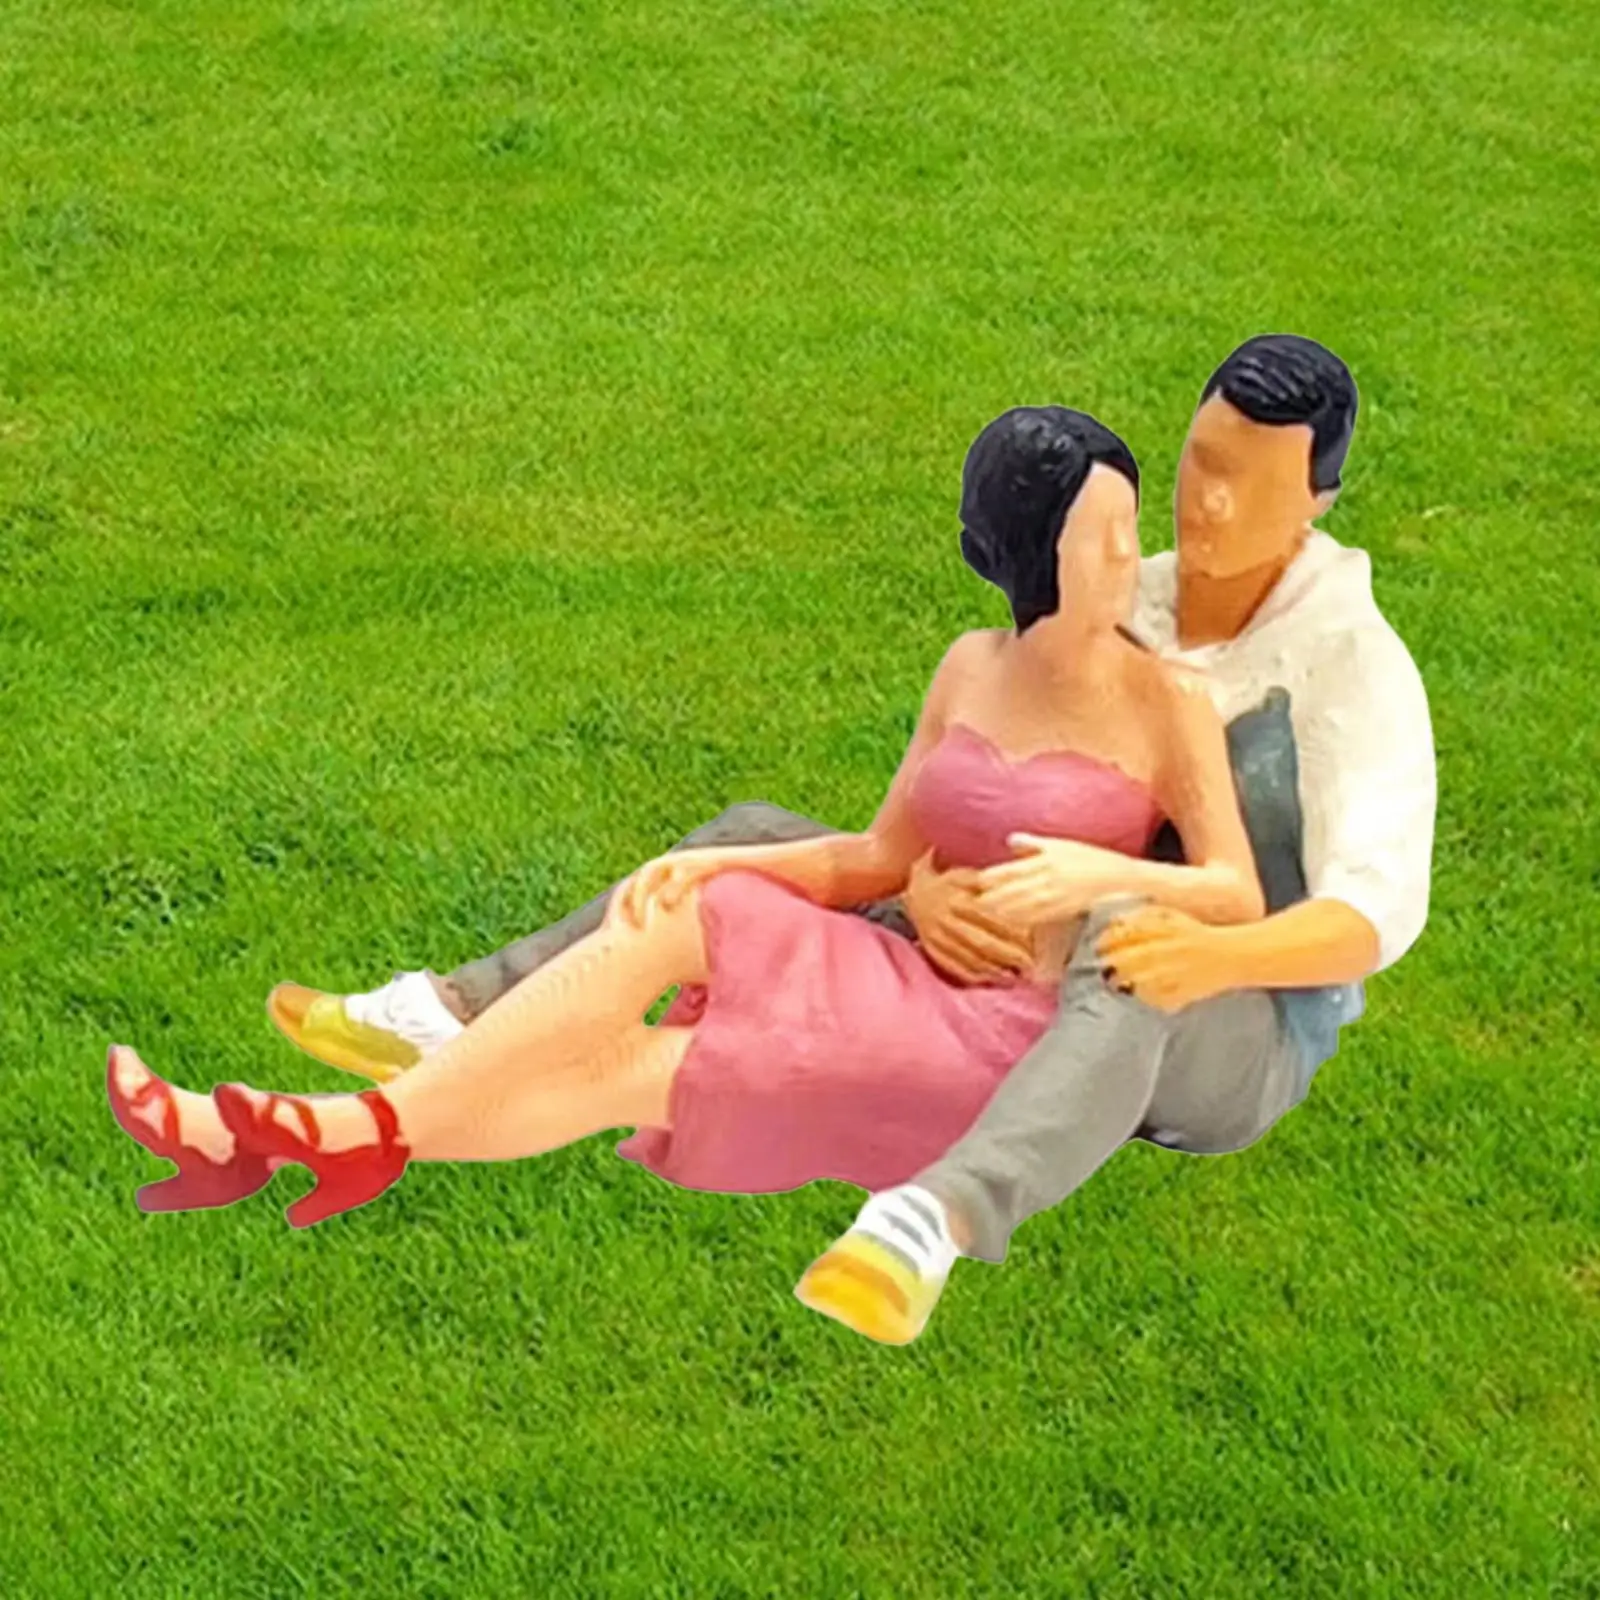 Resin 1:64 Couple Figure Diorama Scenery DIY Projects S Scale Miniature Fairy Garden Train Railway Movie Props Collections Decor